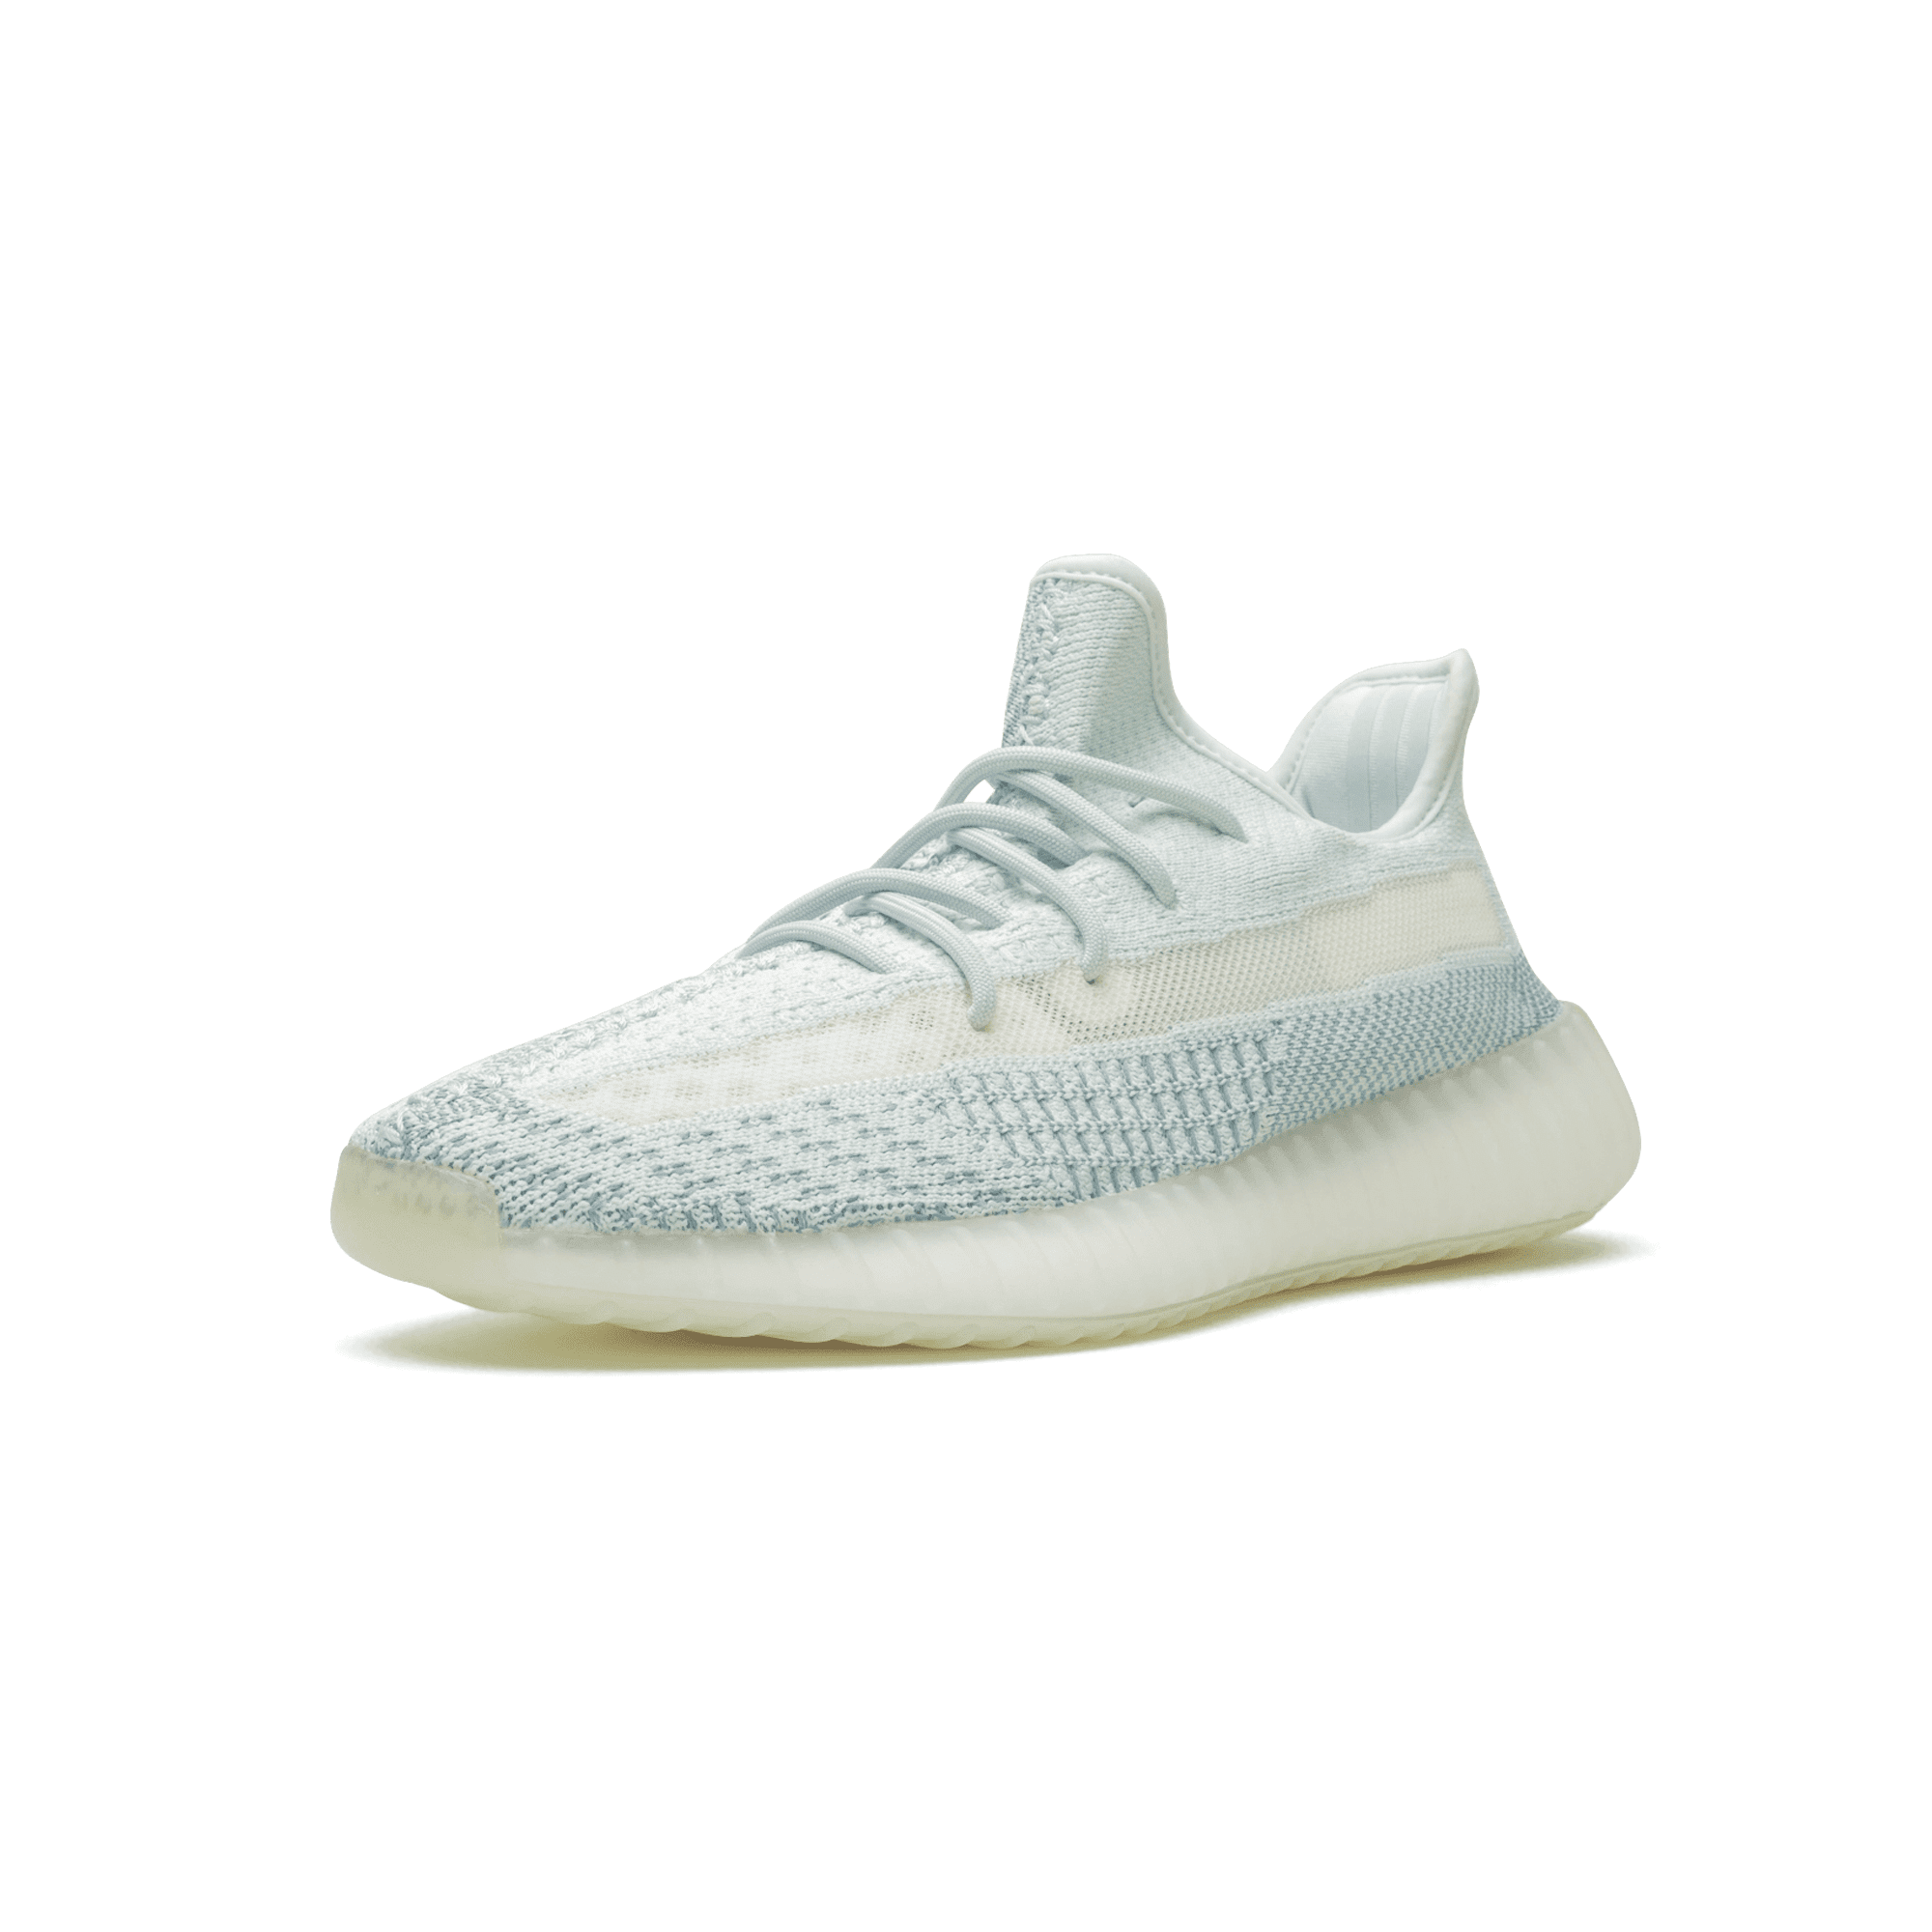 Yeezy Boost 350 V2  “Cloud White” (4049125605448)